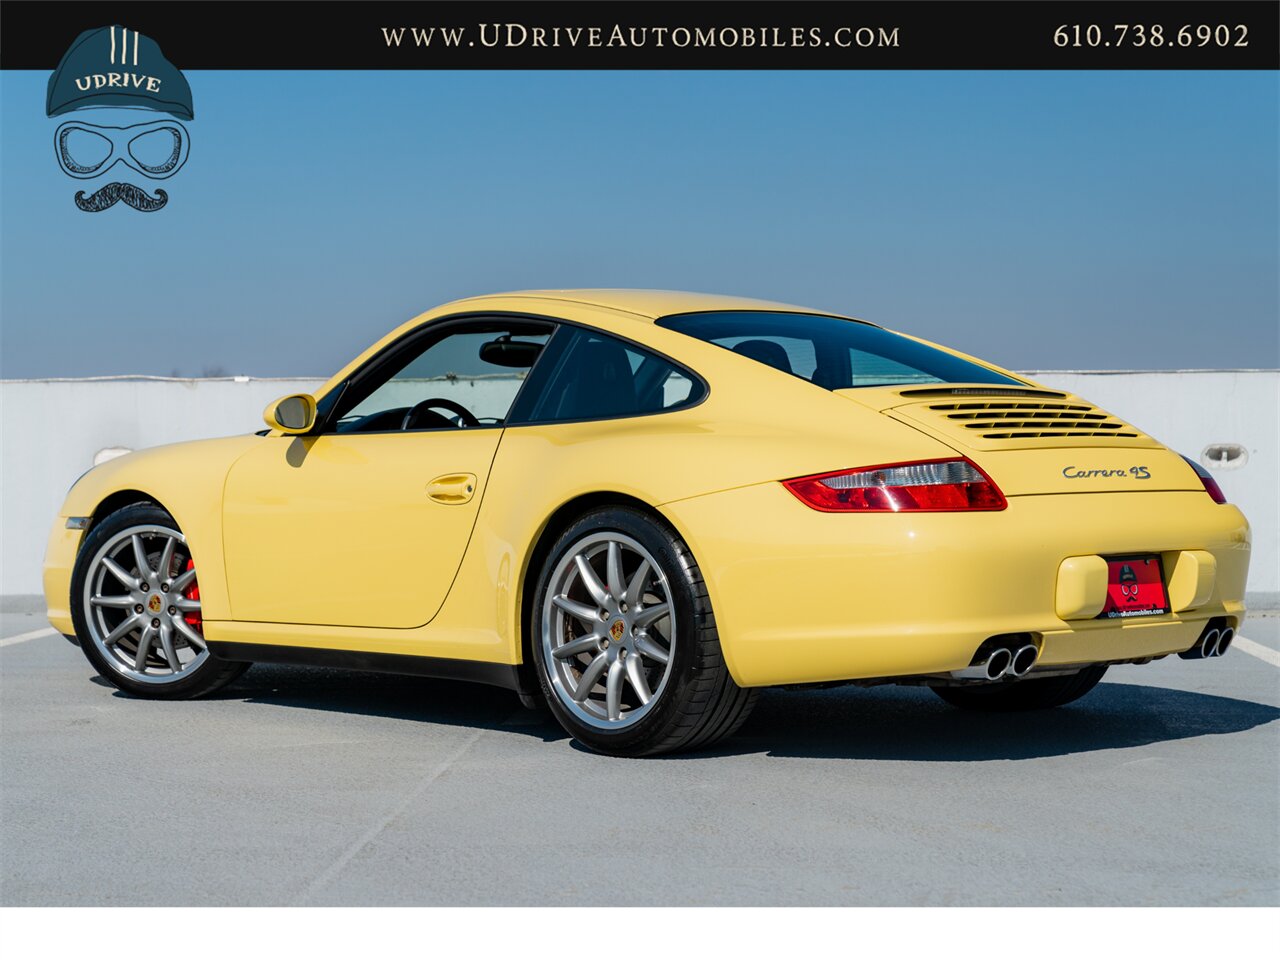 2007 Porsche 911 Carrera 4S 997 C4S Paint To Sample Pastel Yellow  6 Speed Sport Chrono Full Leather Yellow Gauges - Photo 5 - West Chester, PA 19382